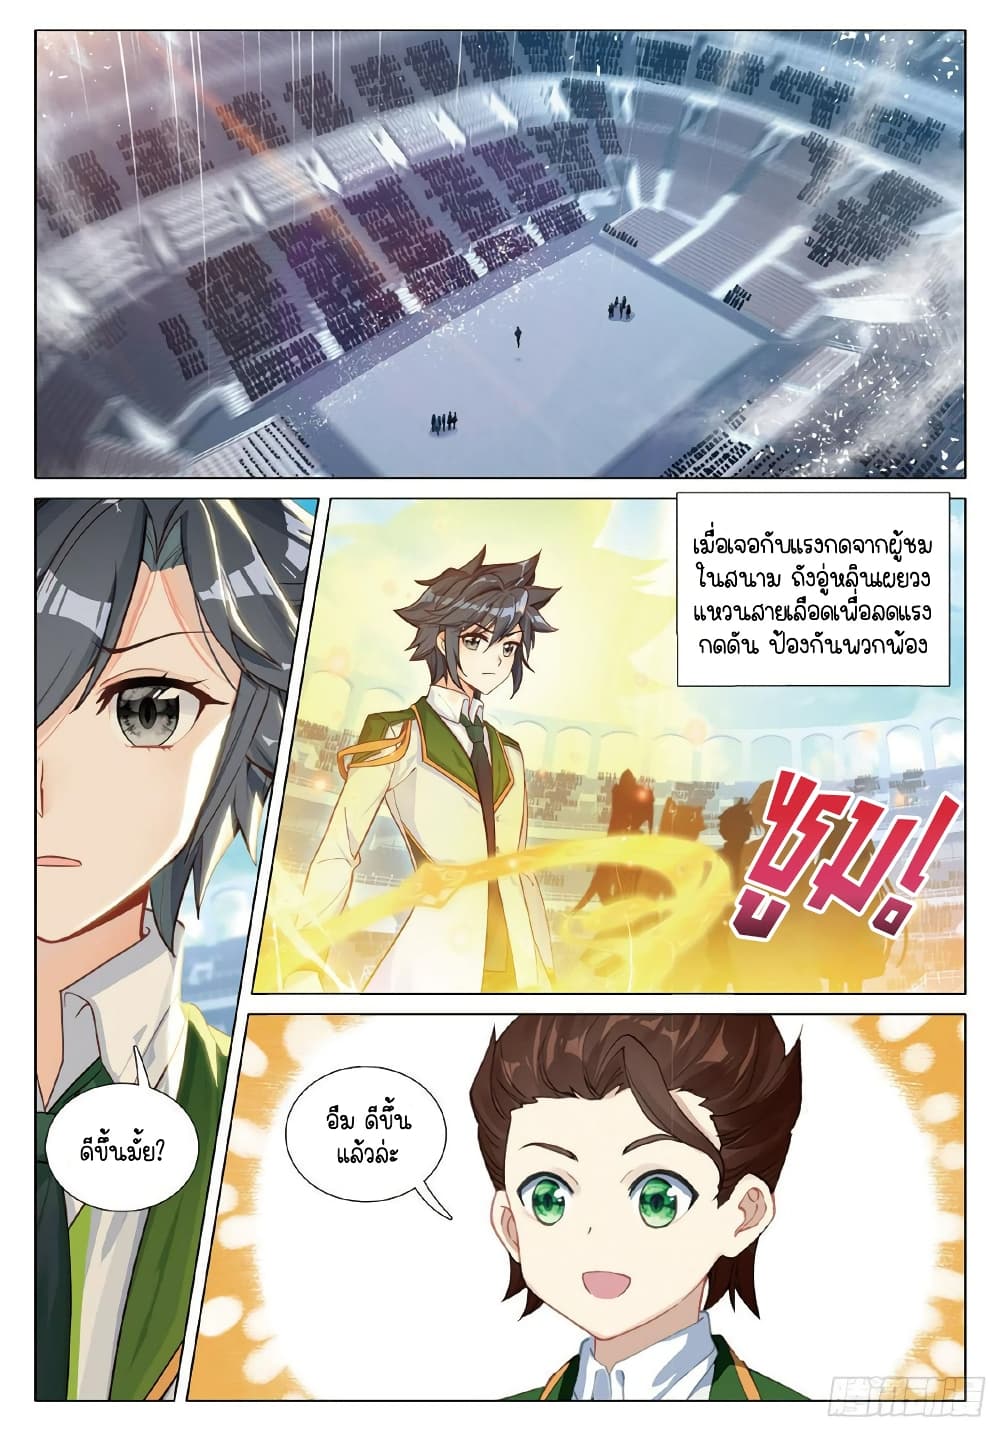 Douluo Dalu 3: The Legend of the Dragon King 266-พลังของมังกร